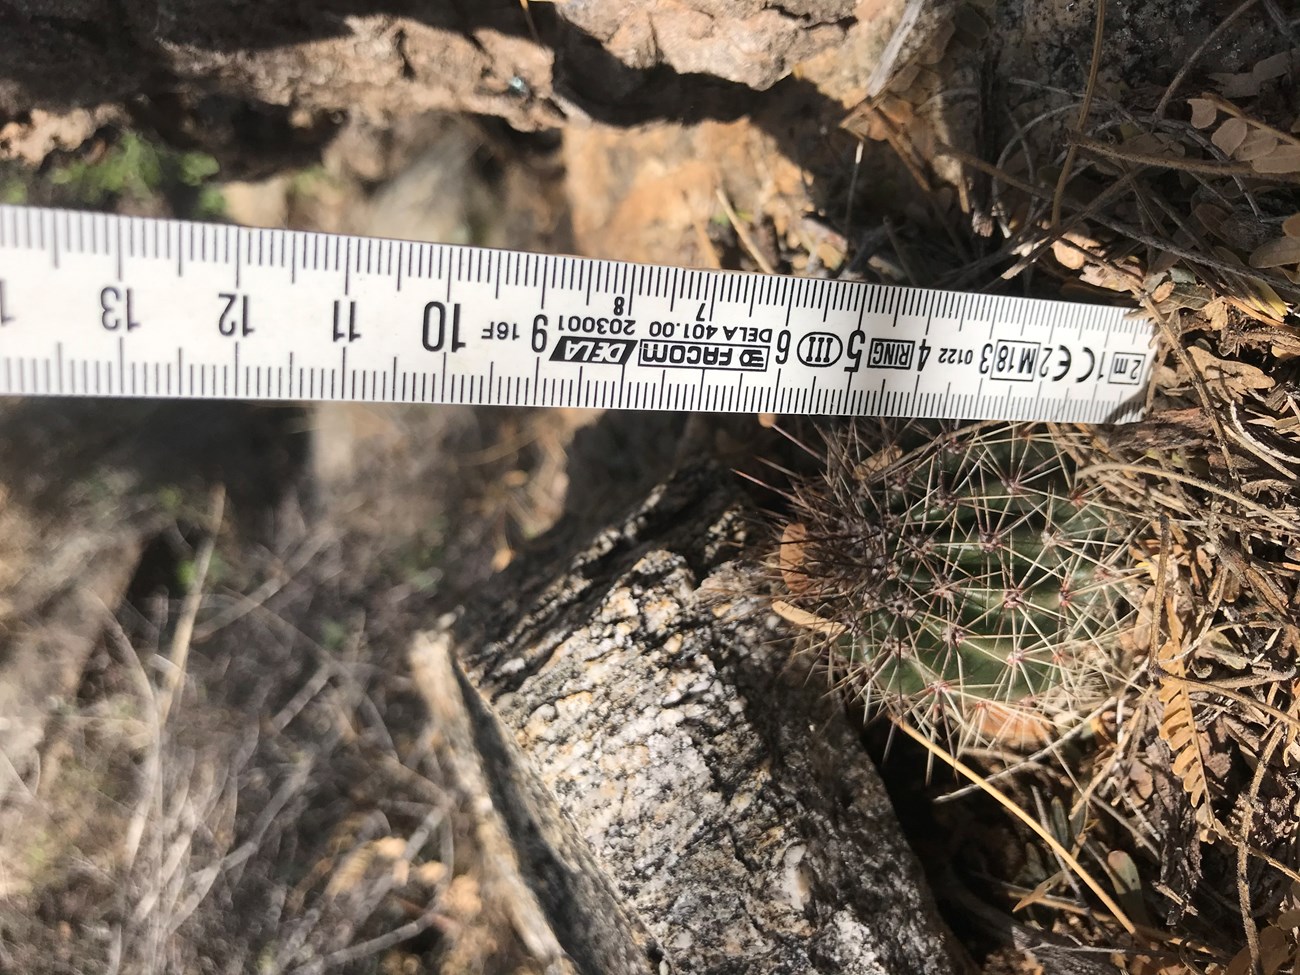 A white ruler next to a tiny saguaro that is about 5 cm in height